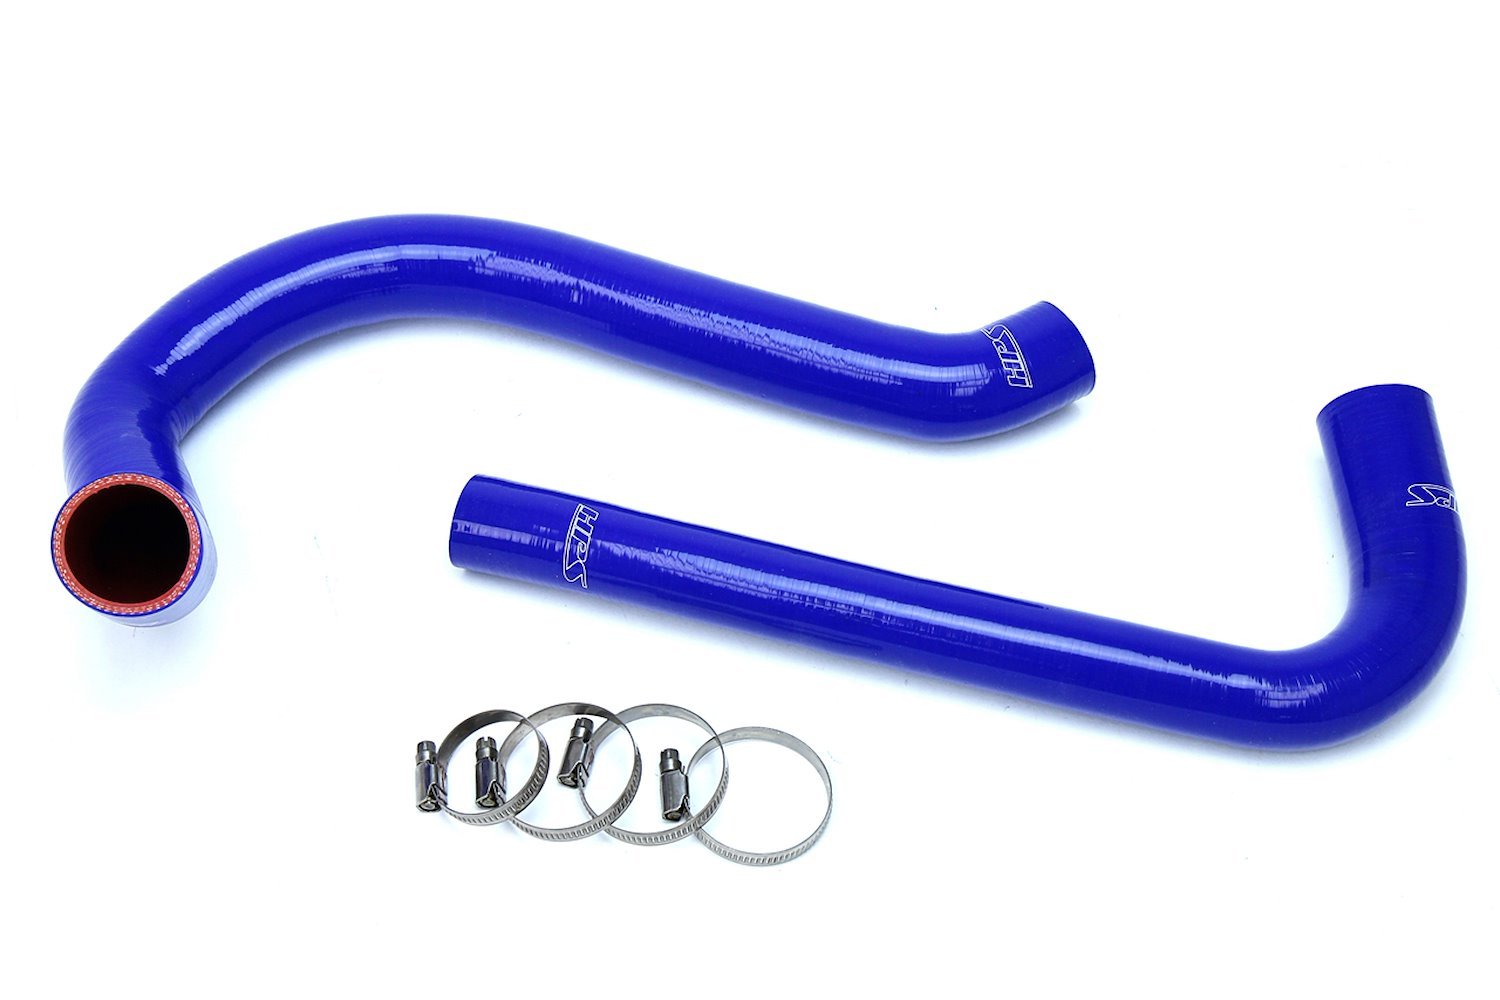 57-1627-BLUE Radiator Hose Kit, High-Temp 3-Ply Reinforced Silicone, Replace OEM Rubber Radiator Coolant Hoses